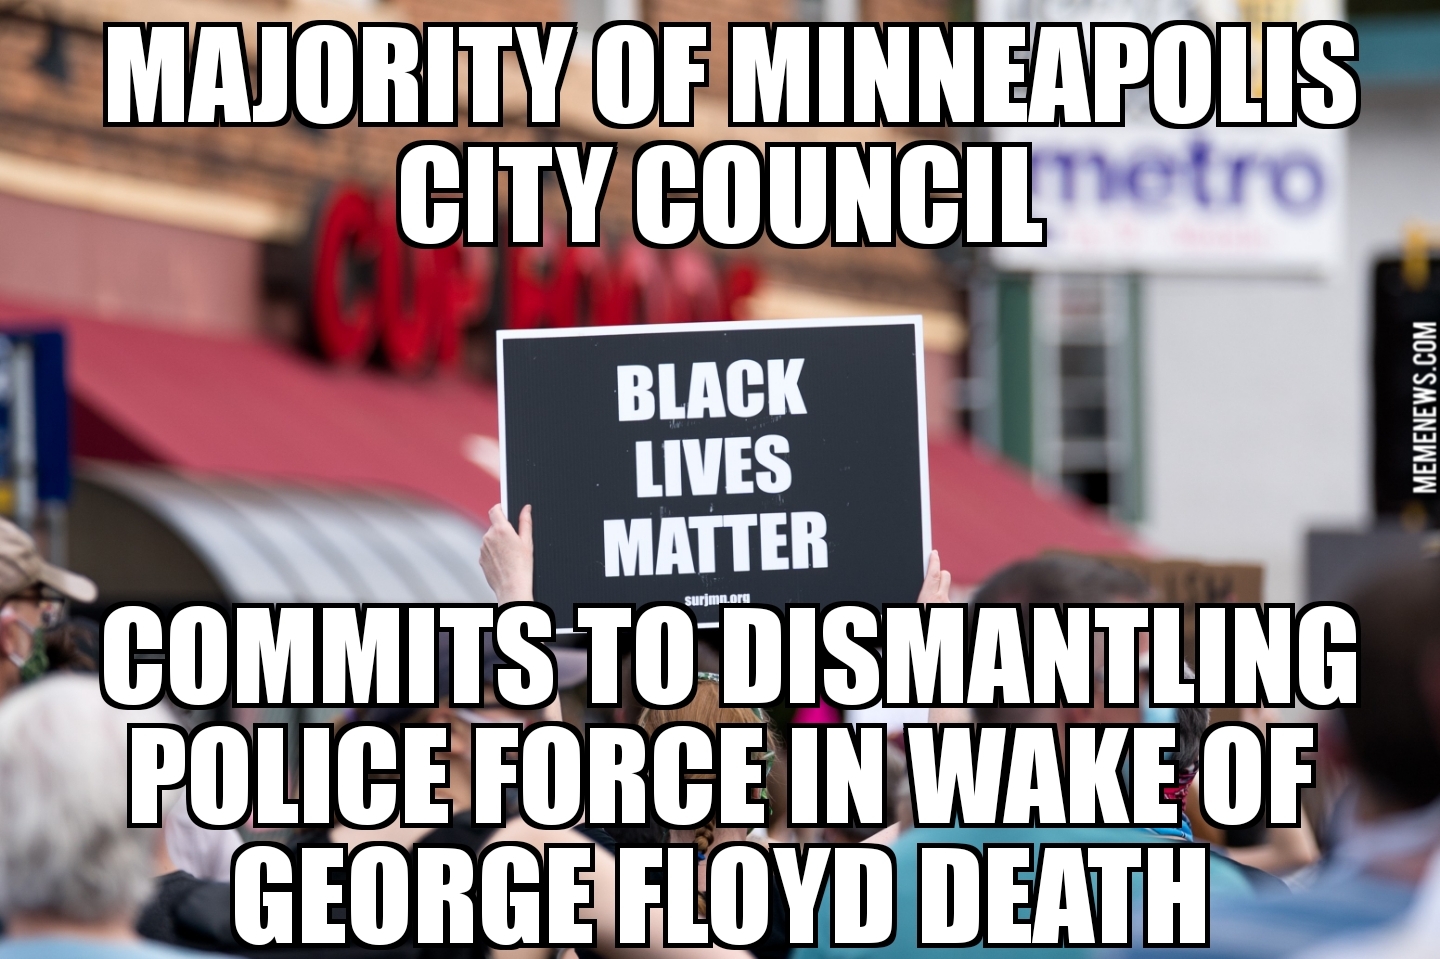 Most of Minneapolis city council commits to dismantling police